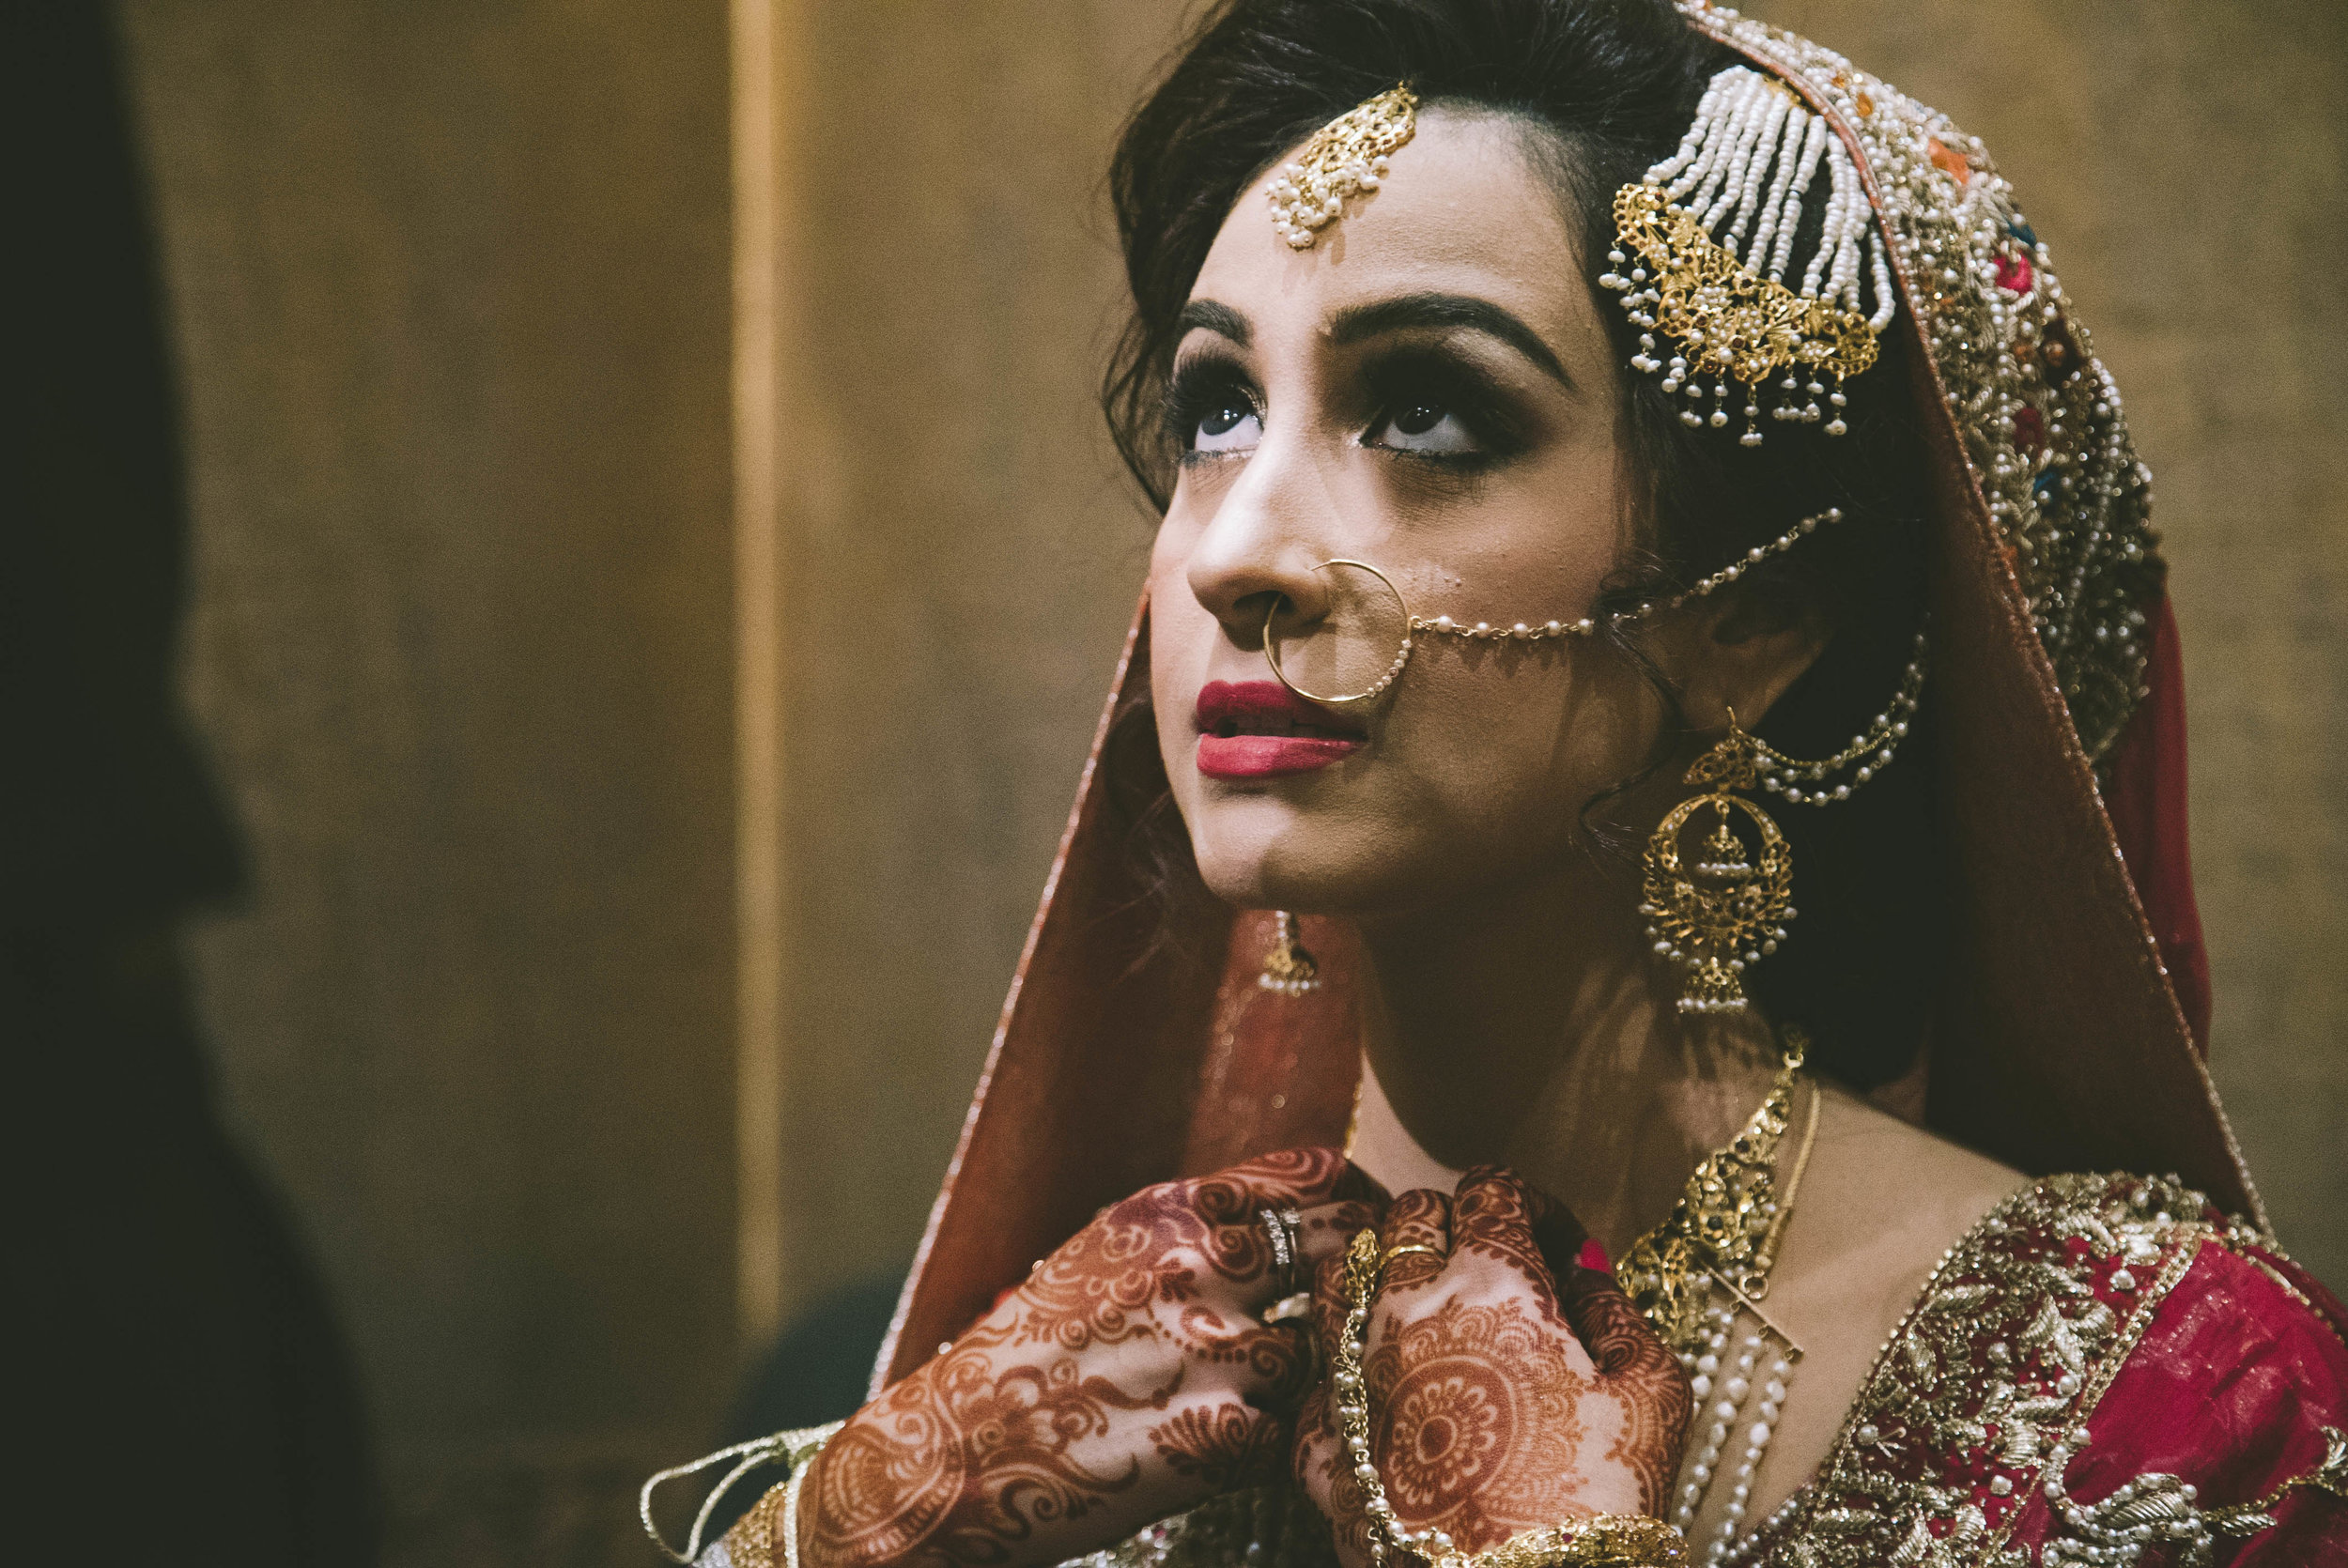  Sadaf Sadal, overcome with nerves, is comforted by friends and family on the day of her  baraat . The  baraat  is a particularly emotional day for brides, because it is the day that the bride goes to her new family's home. Having usually lived with 